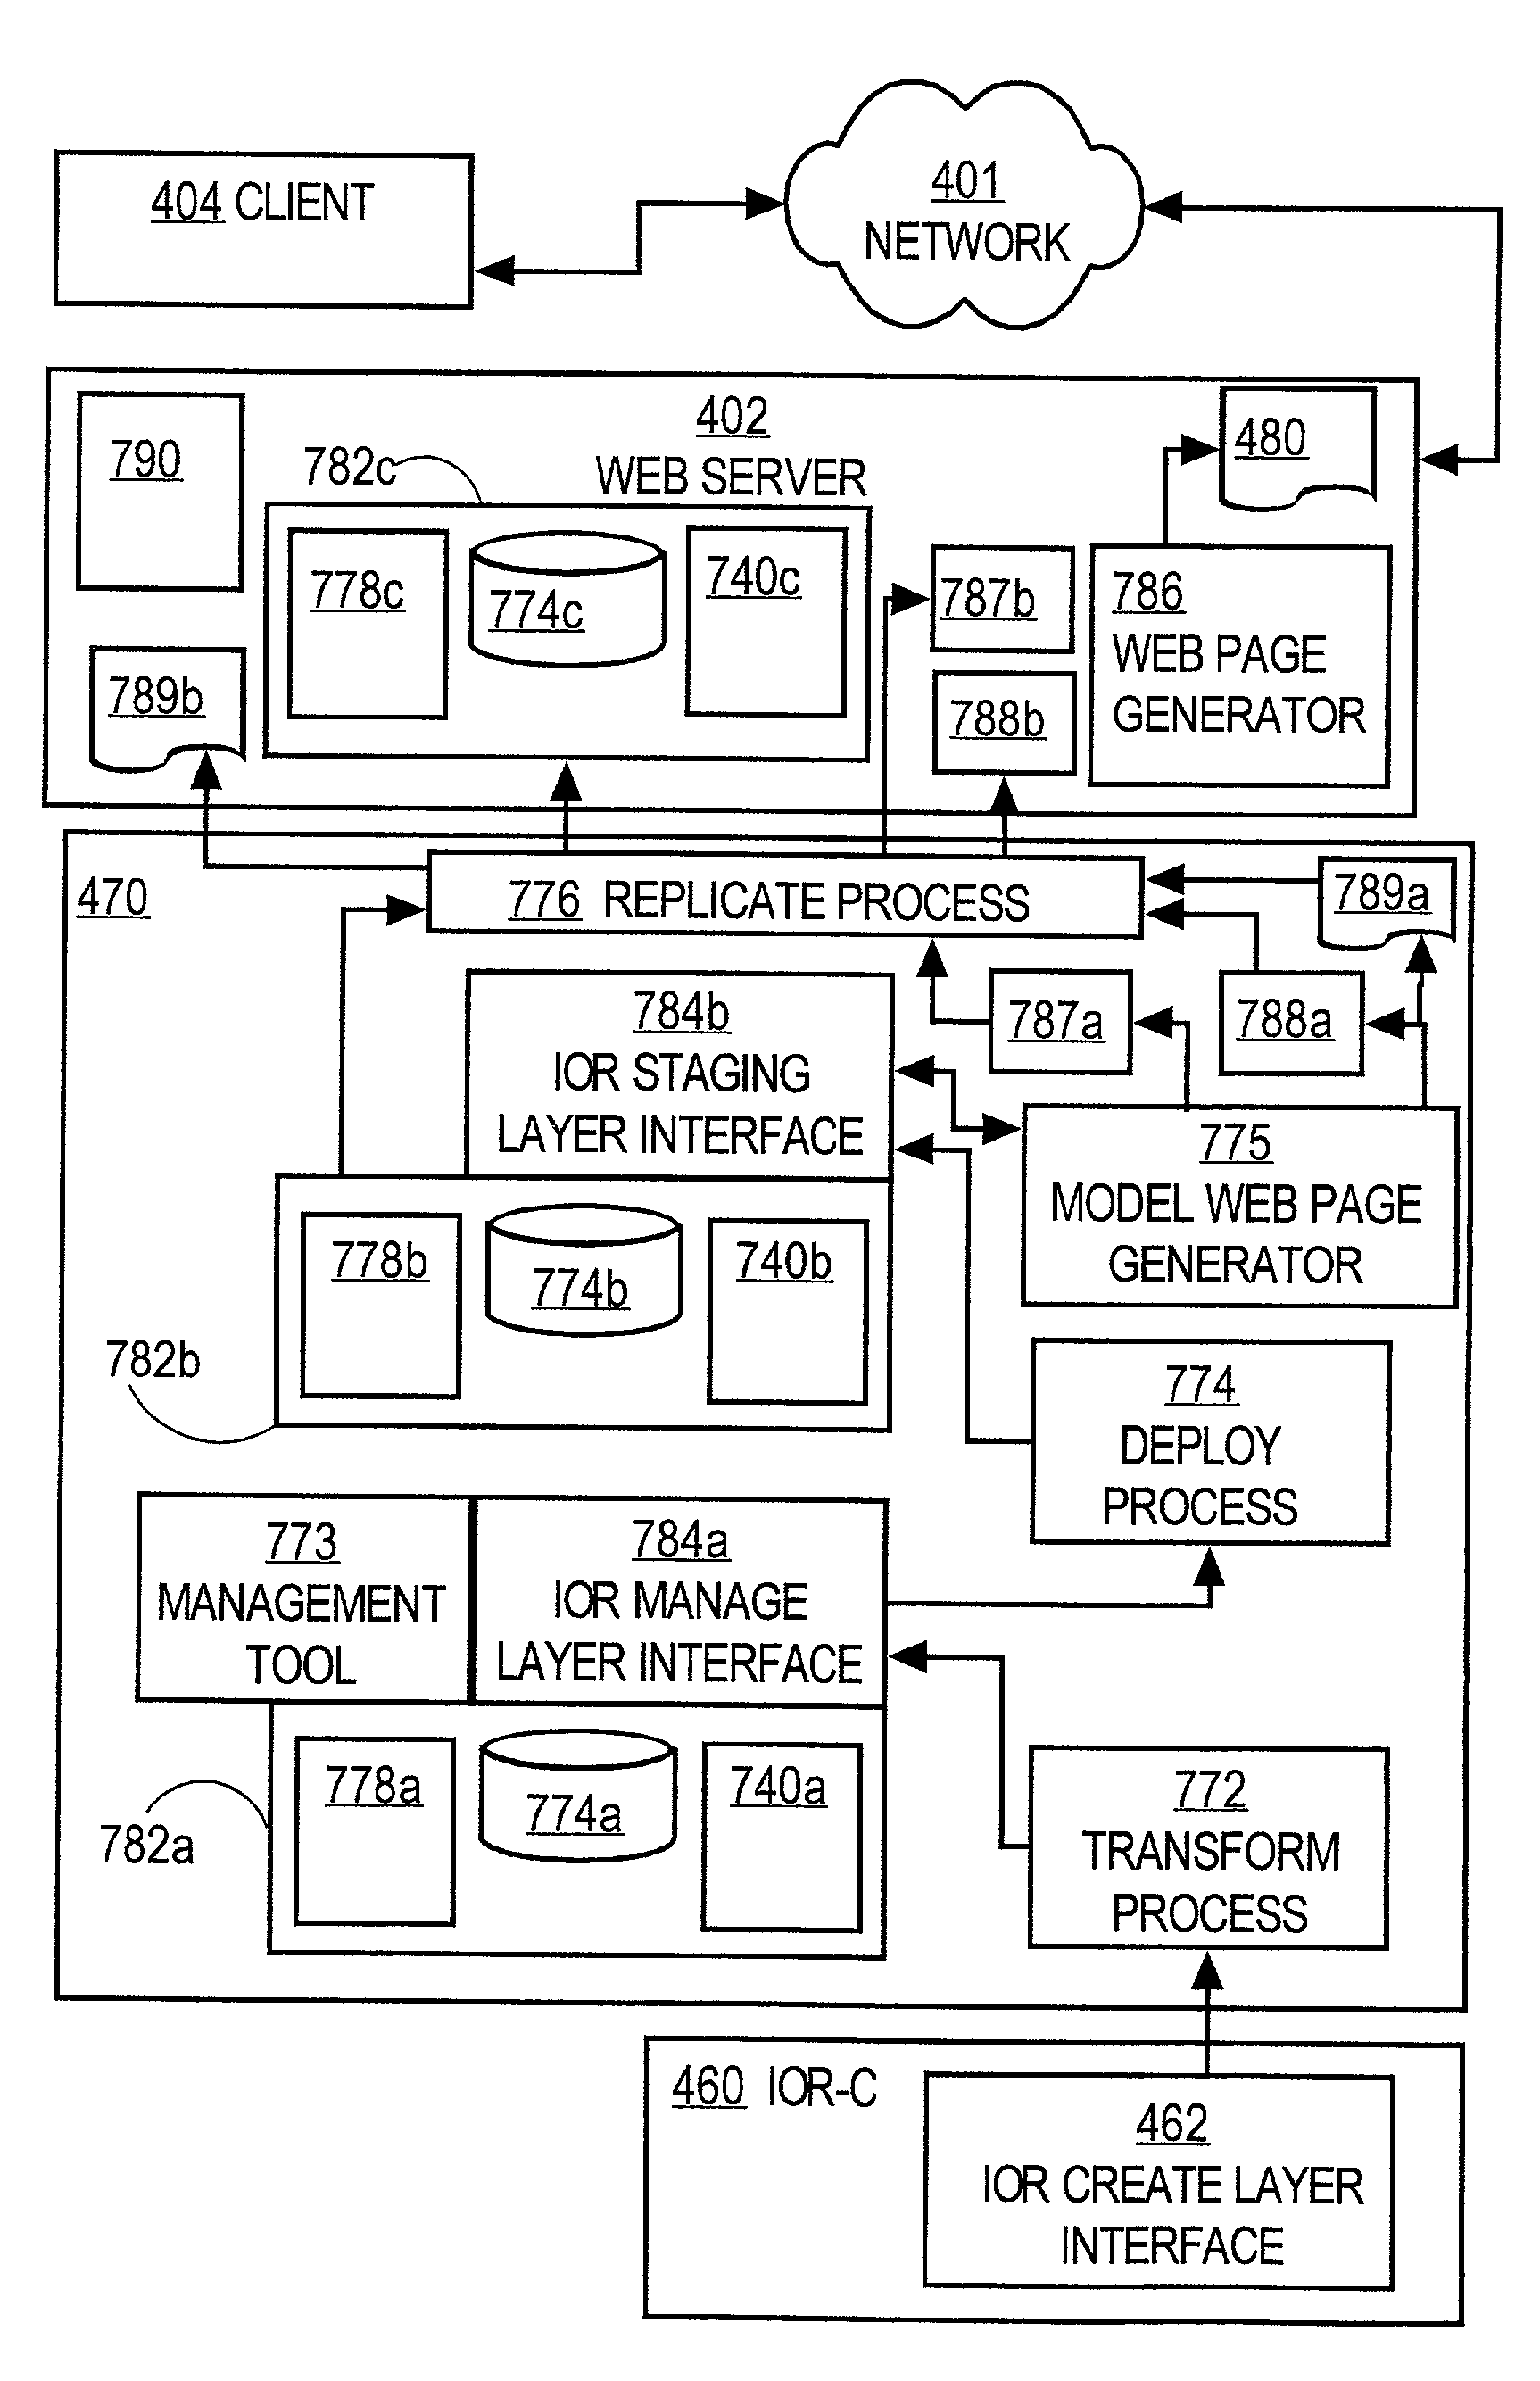 Dynamic information object cache approach useful in a vocabulary retrieval system